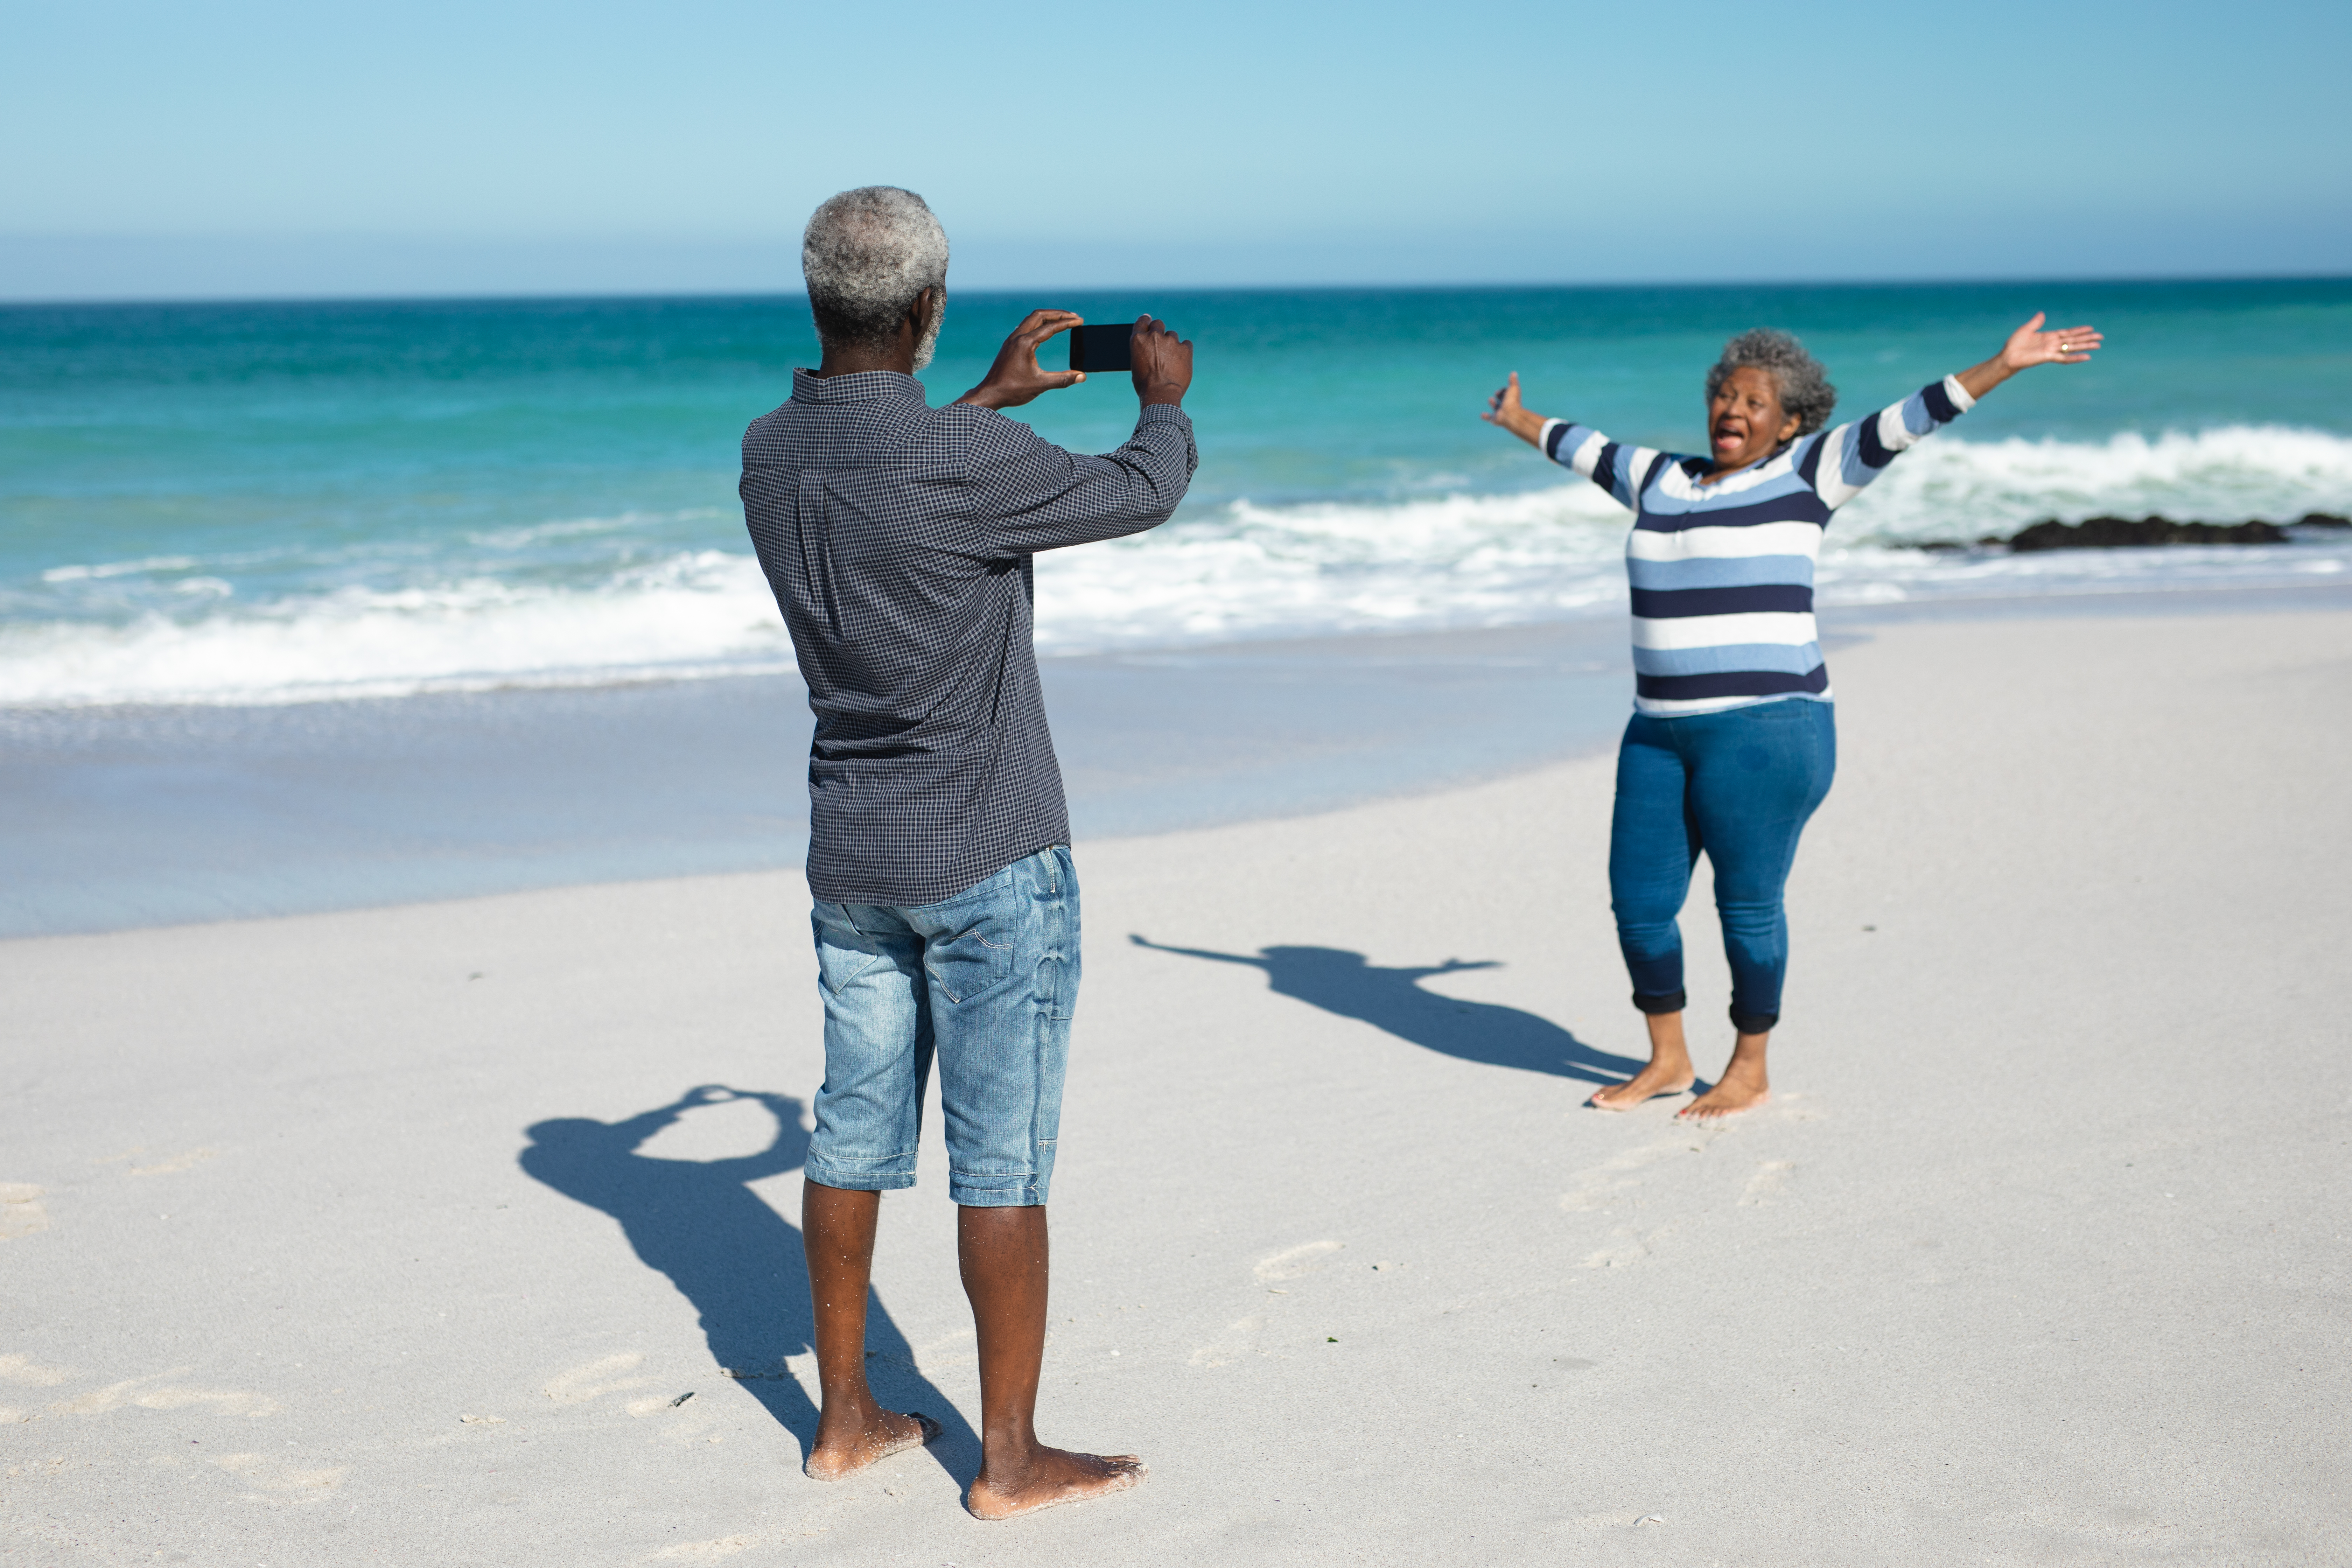 Front view of an African American couple standing on the beach with blue sky and sea in the background, the woman raising her hands and smiling, while the man takes a photo of her with his smartphone